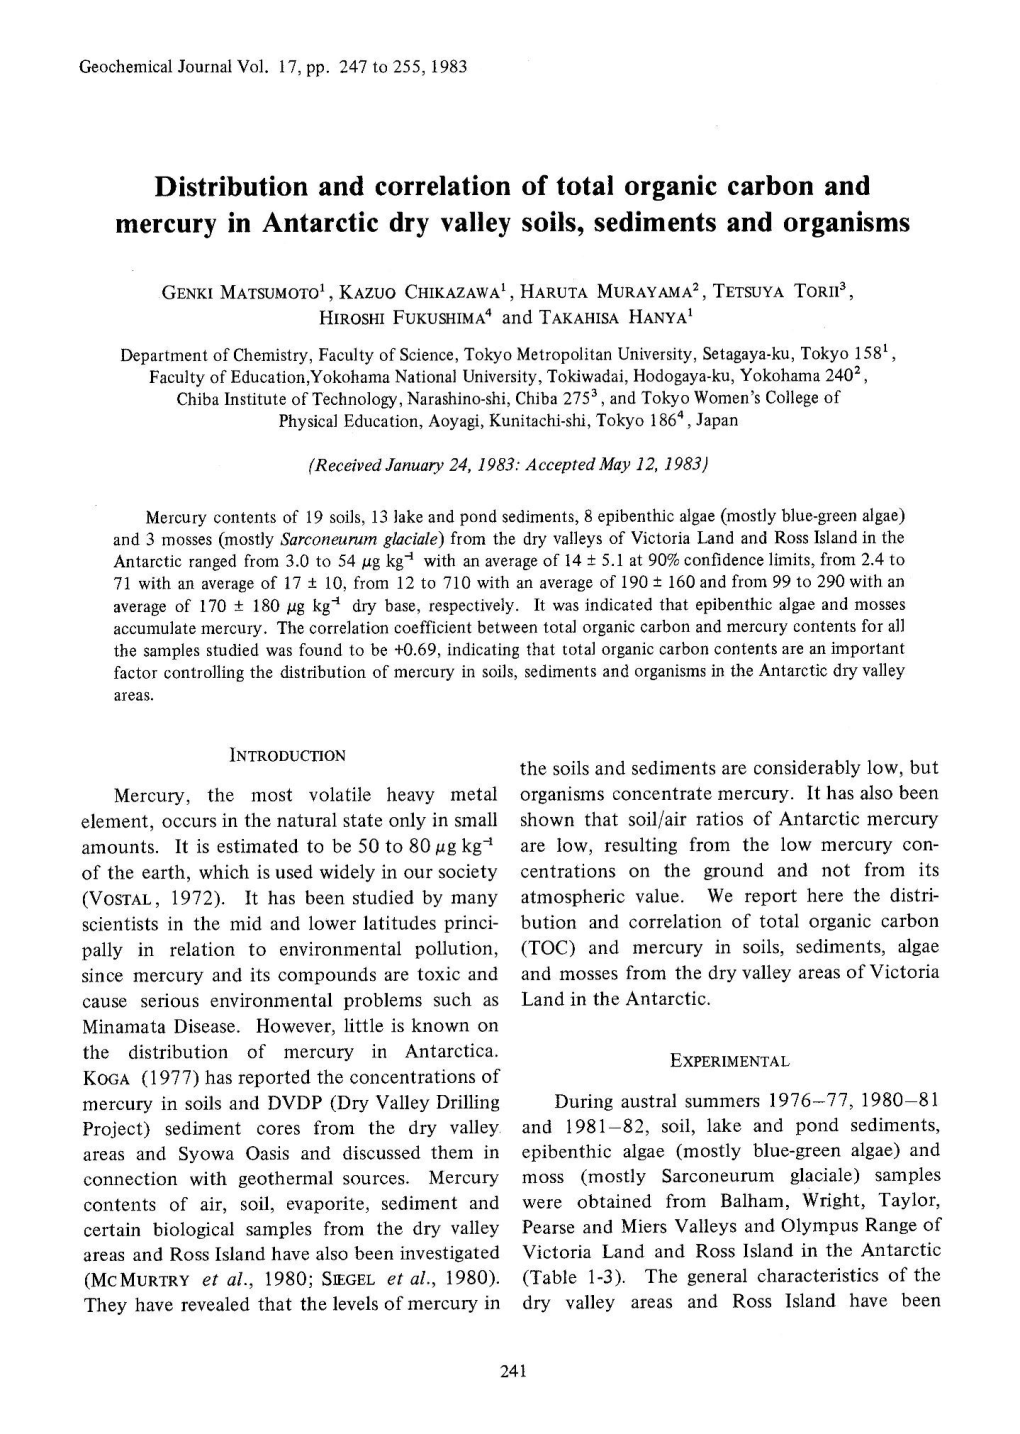 Page 1 Geochemical Journal Vol. 17, Pp. 247 to 255, 1983 Distribution and Correlation of Total Organic Carbon and Mercury in Antarctic Dry Valley Soils, Sediments and Organisms GENKI